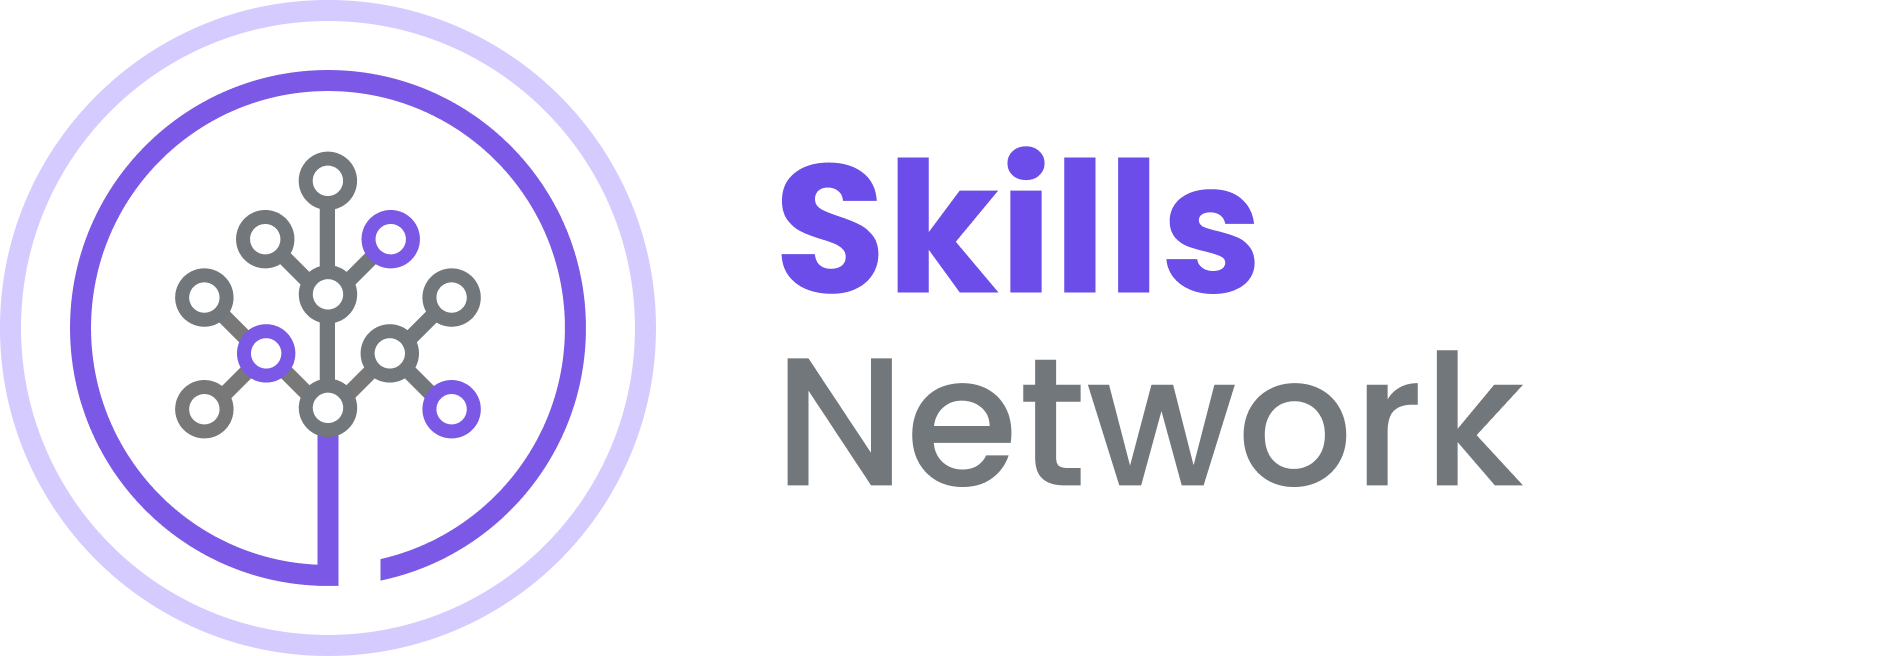 Skills Network Faculty Updates